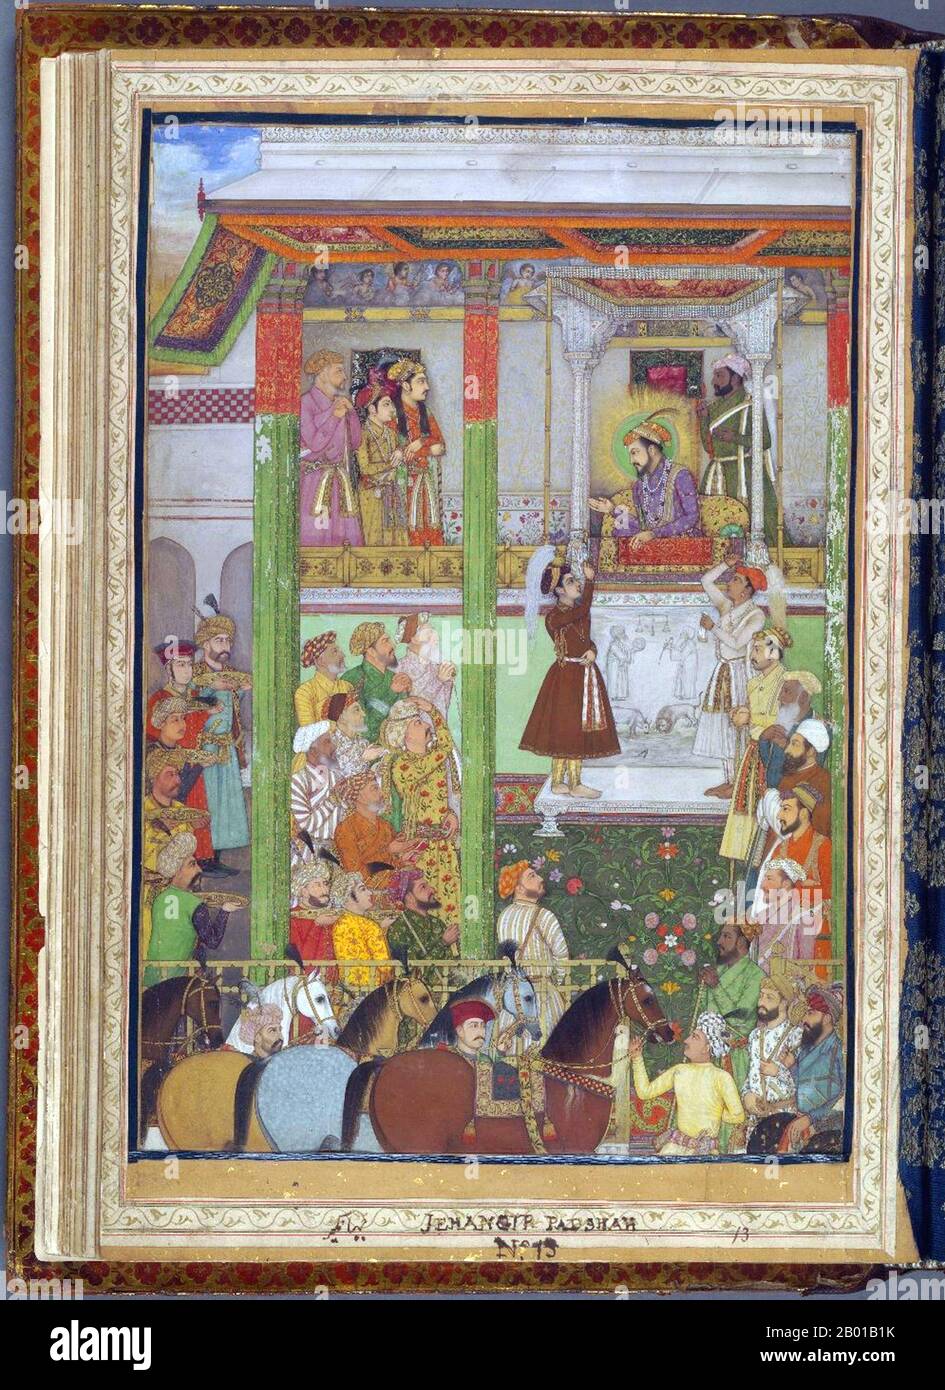 India: Emperor Shah Jahan (5 January 1592 - 22 January 1666) receives Ali Mardan Khan in his durbar (court). Miniature painting, c. 1640.  Shah Jahan was the fifth emperor of the Mughal Empire, ruling from 1628 until 1658. The name Shah Jahan comes from the Persian meaning 'King of the World'. While young, he was a favourite of his legendary grandfather Akbar the Great. He is also known as 'Shah Jahan the Magnificent'. The period of his reign is considered the golden age of Mughal expansion; by the end of his reign the Mughal Empire covered 3 million square km and most of India. Stock Photo